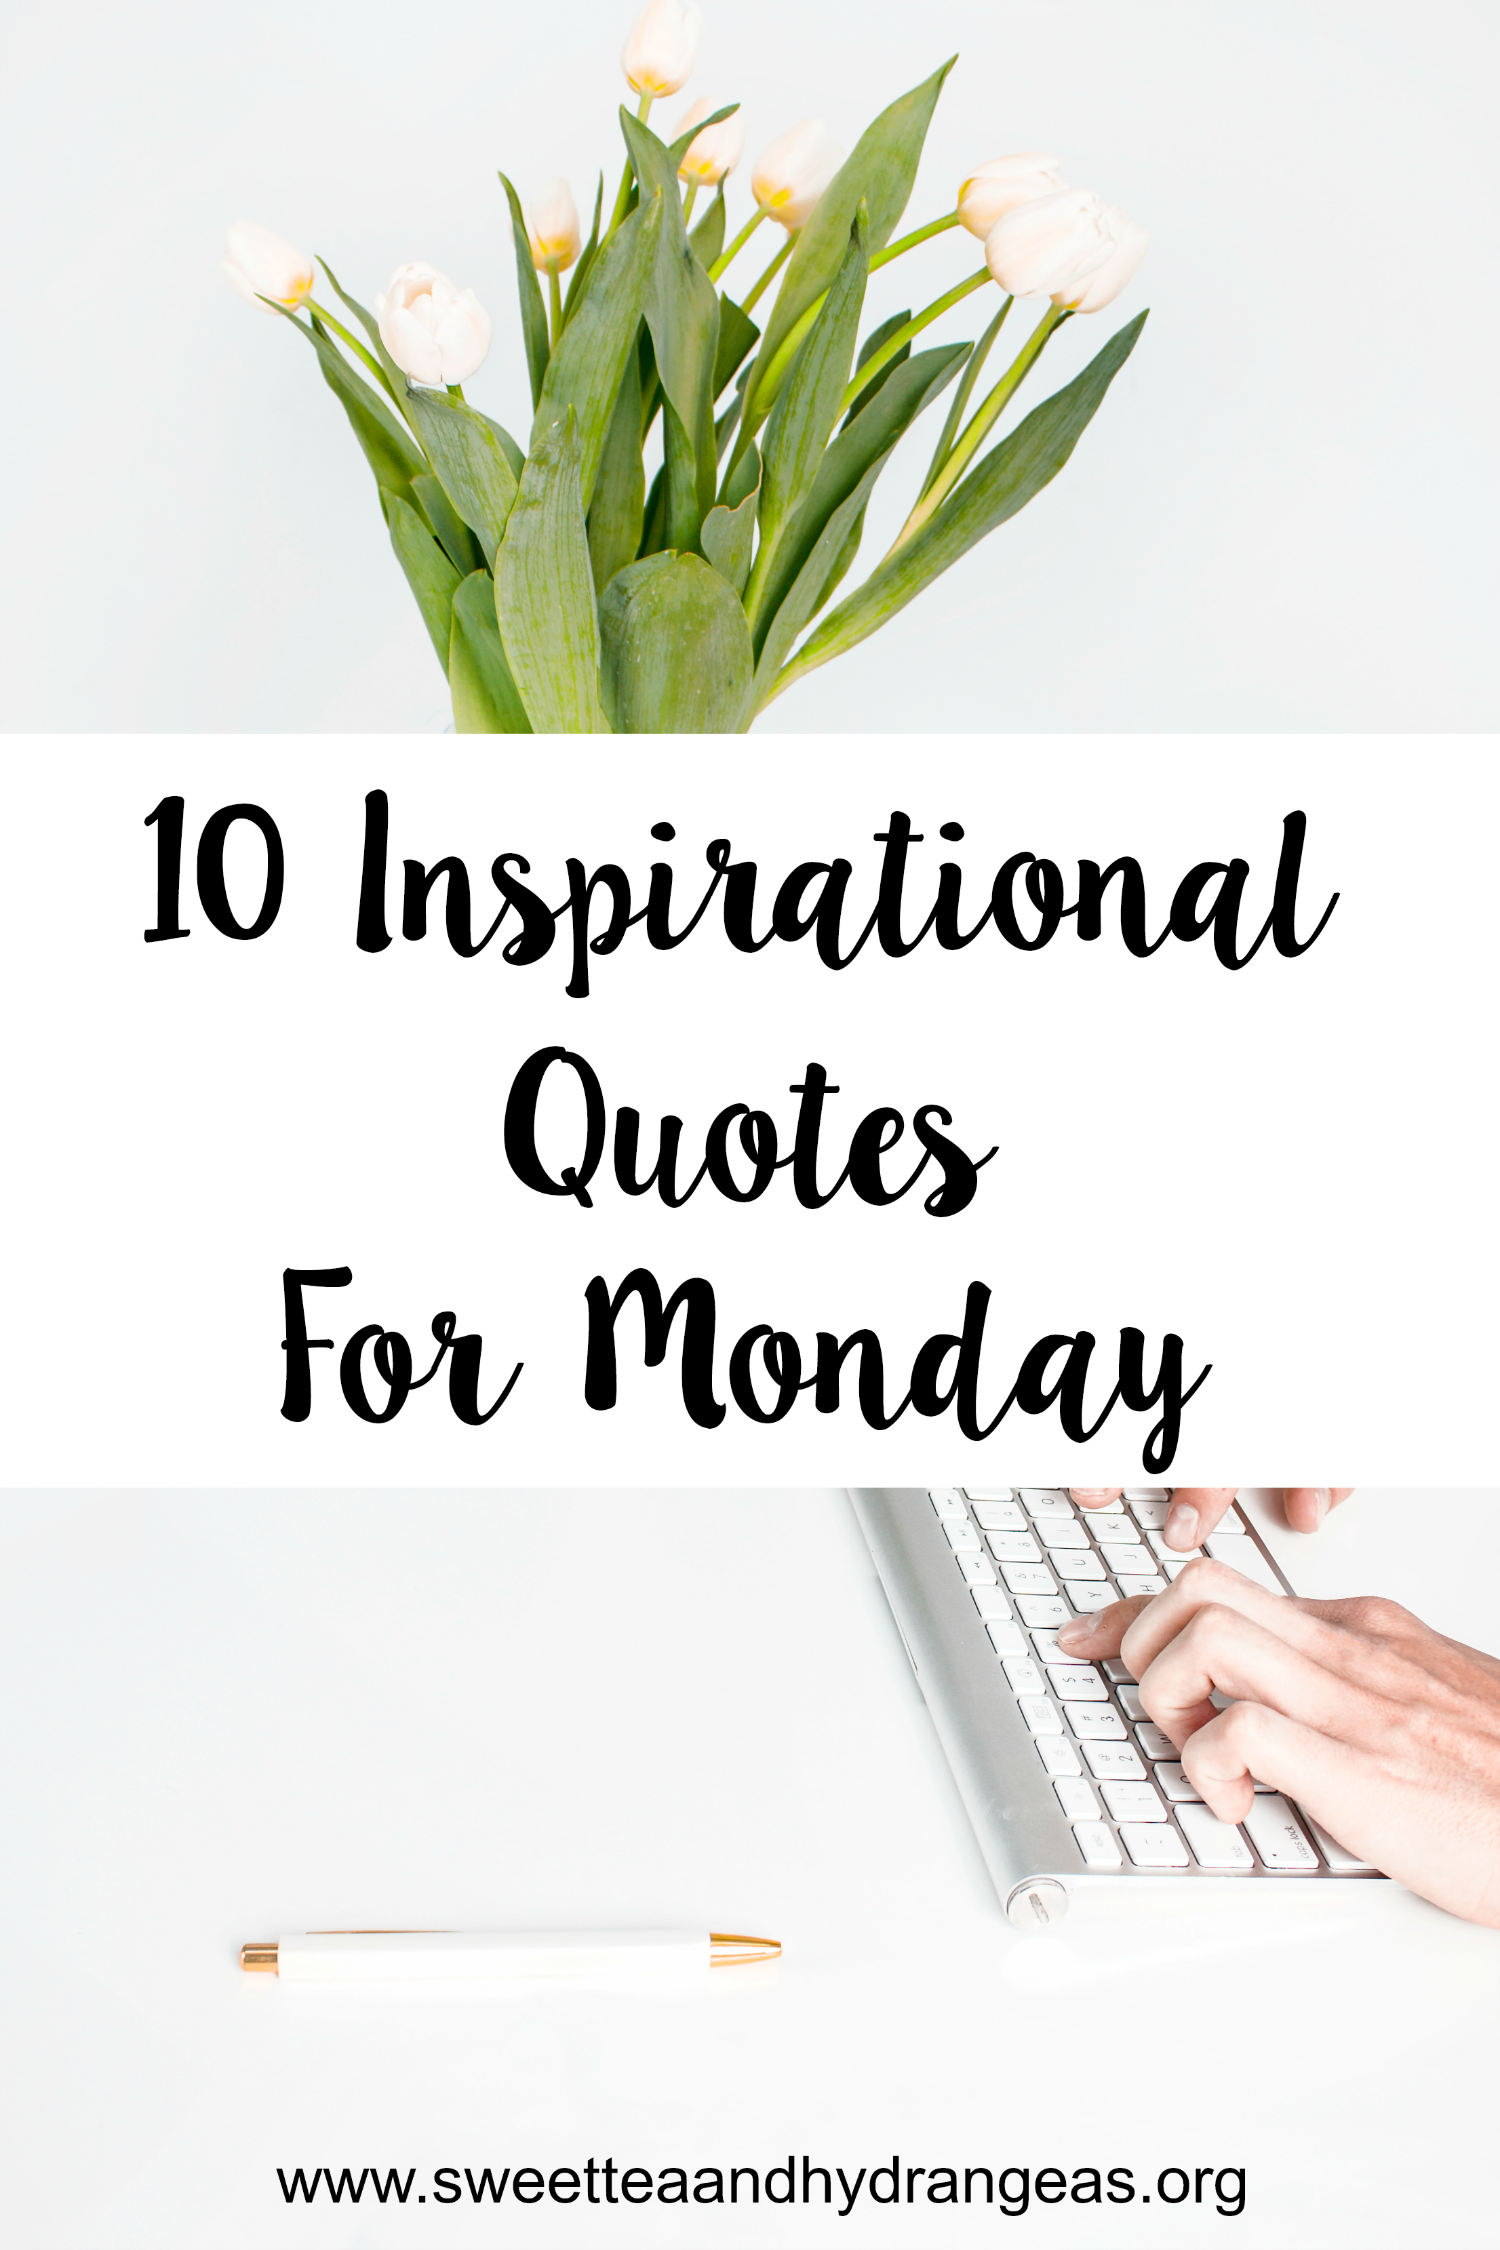 10 Inspirational Quotes For Monday